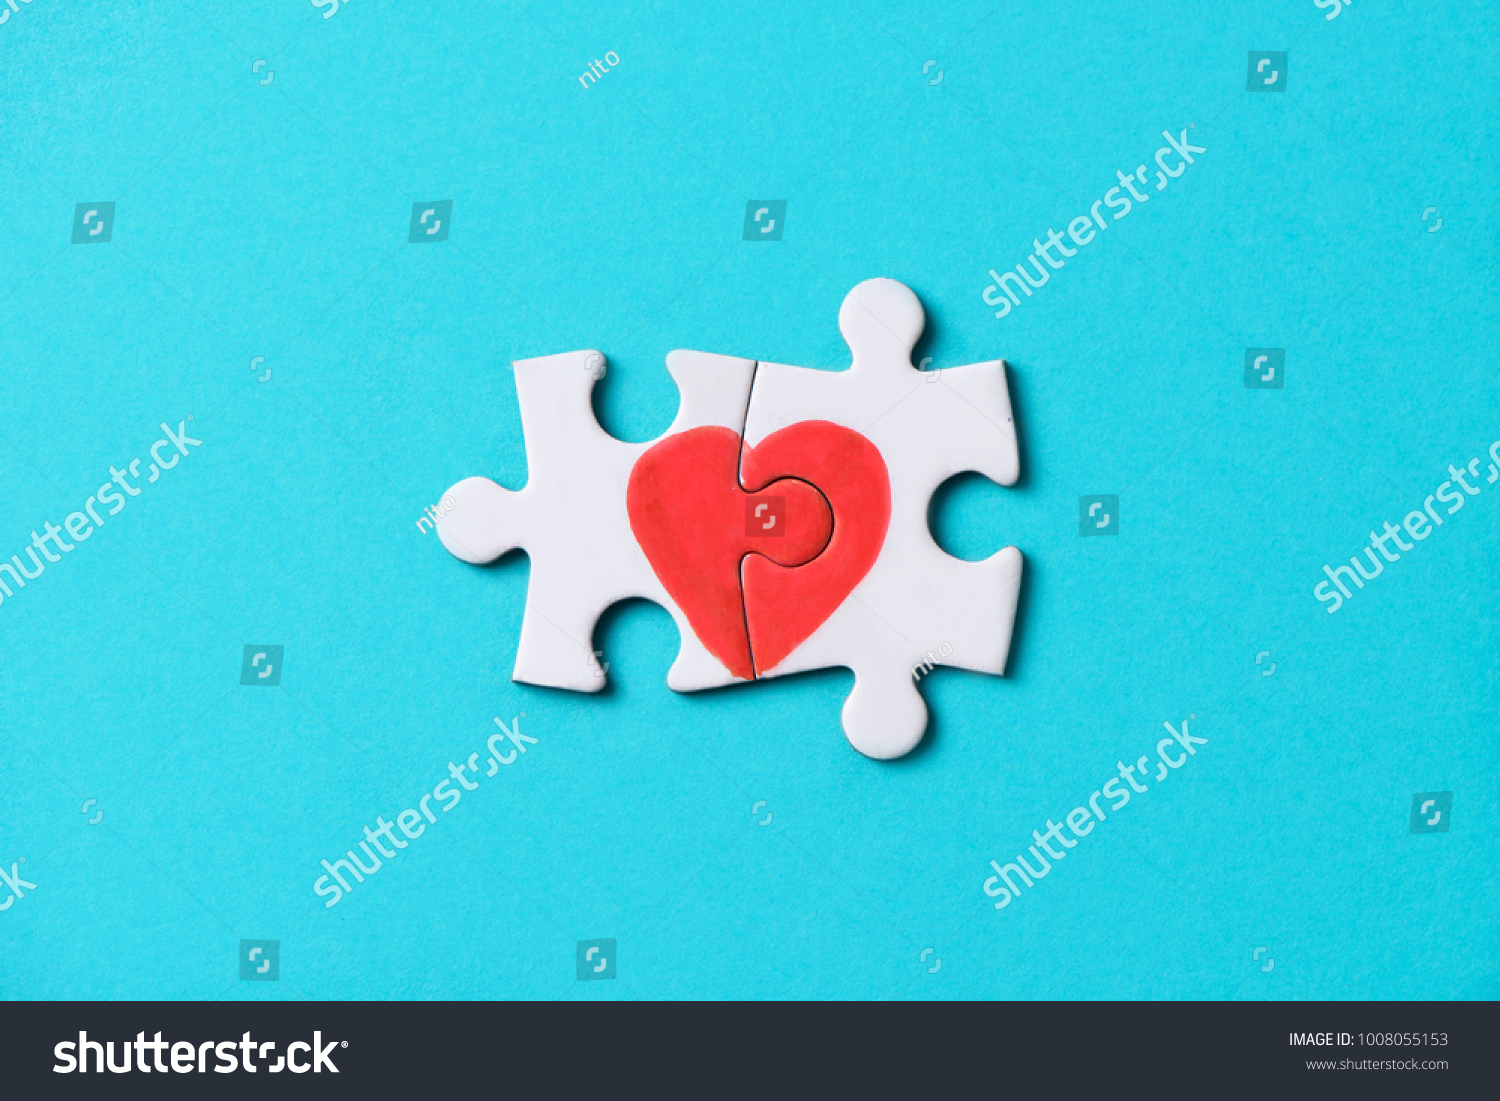 closeup of two pieces of a puzzle forming a heart, depicting the idea that love is a matter of two, on a blue background, with some blank space around it #1008055153